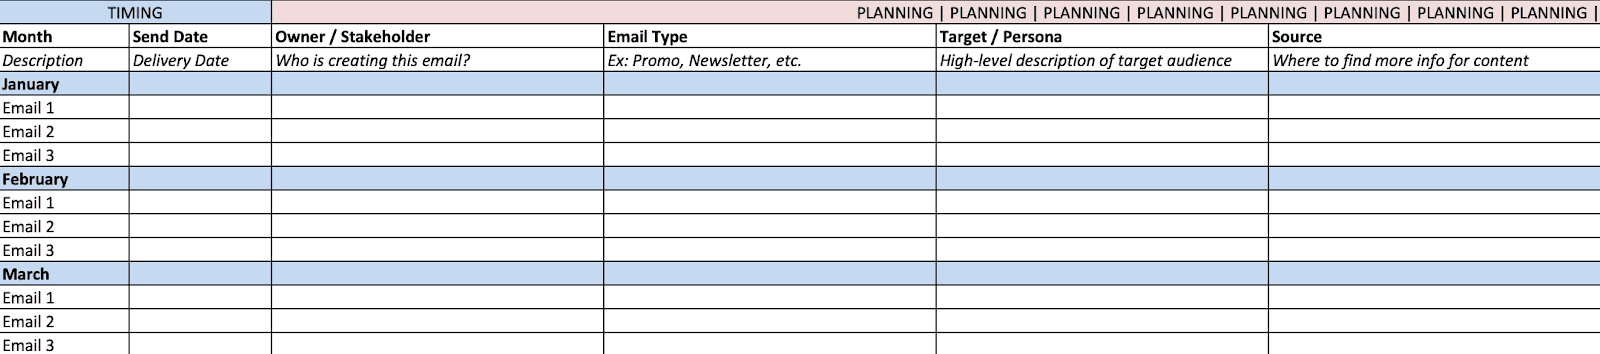 Example from the spreadsheet template